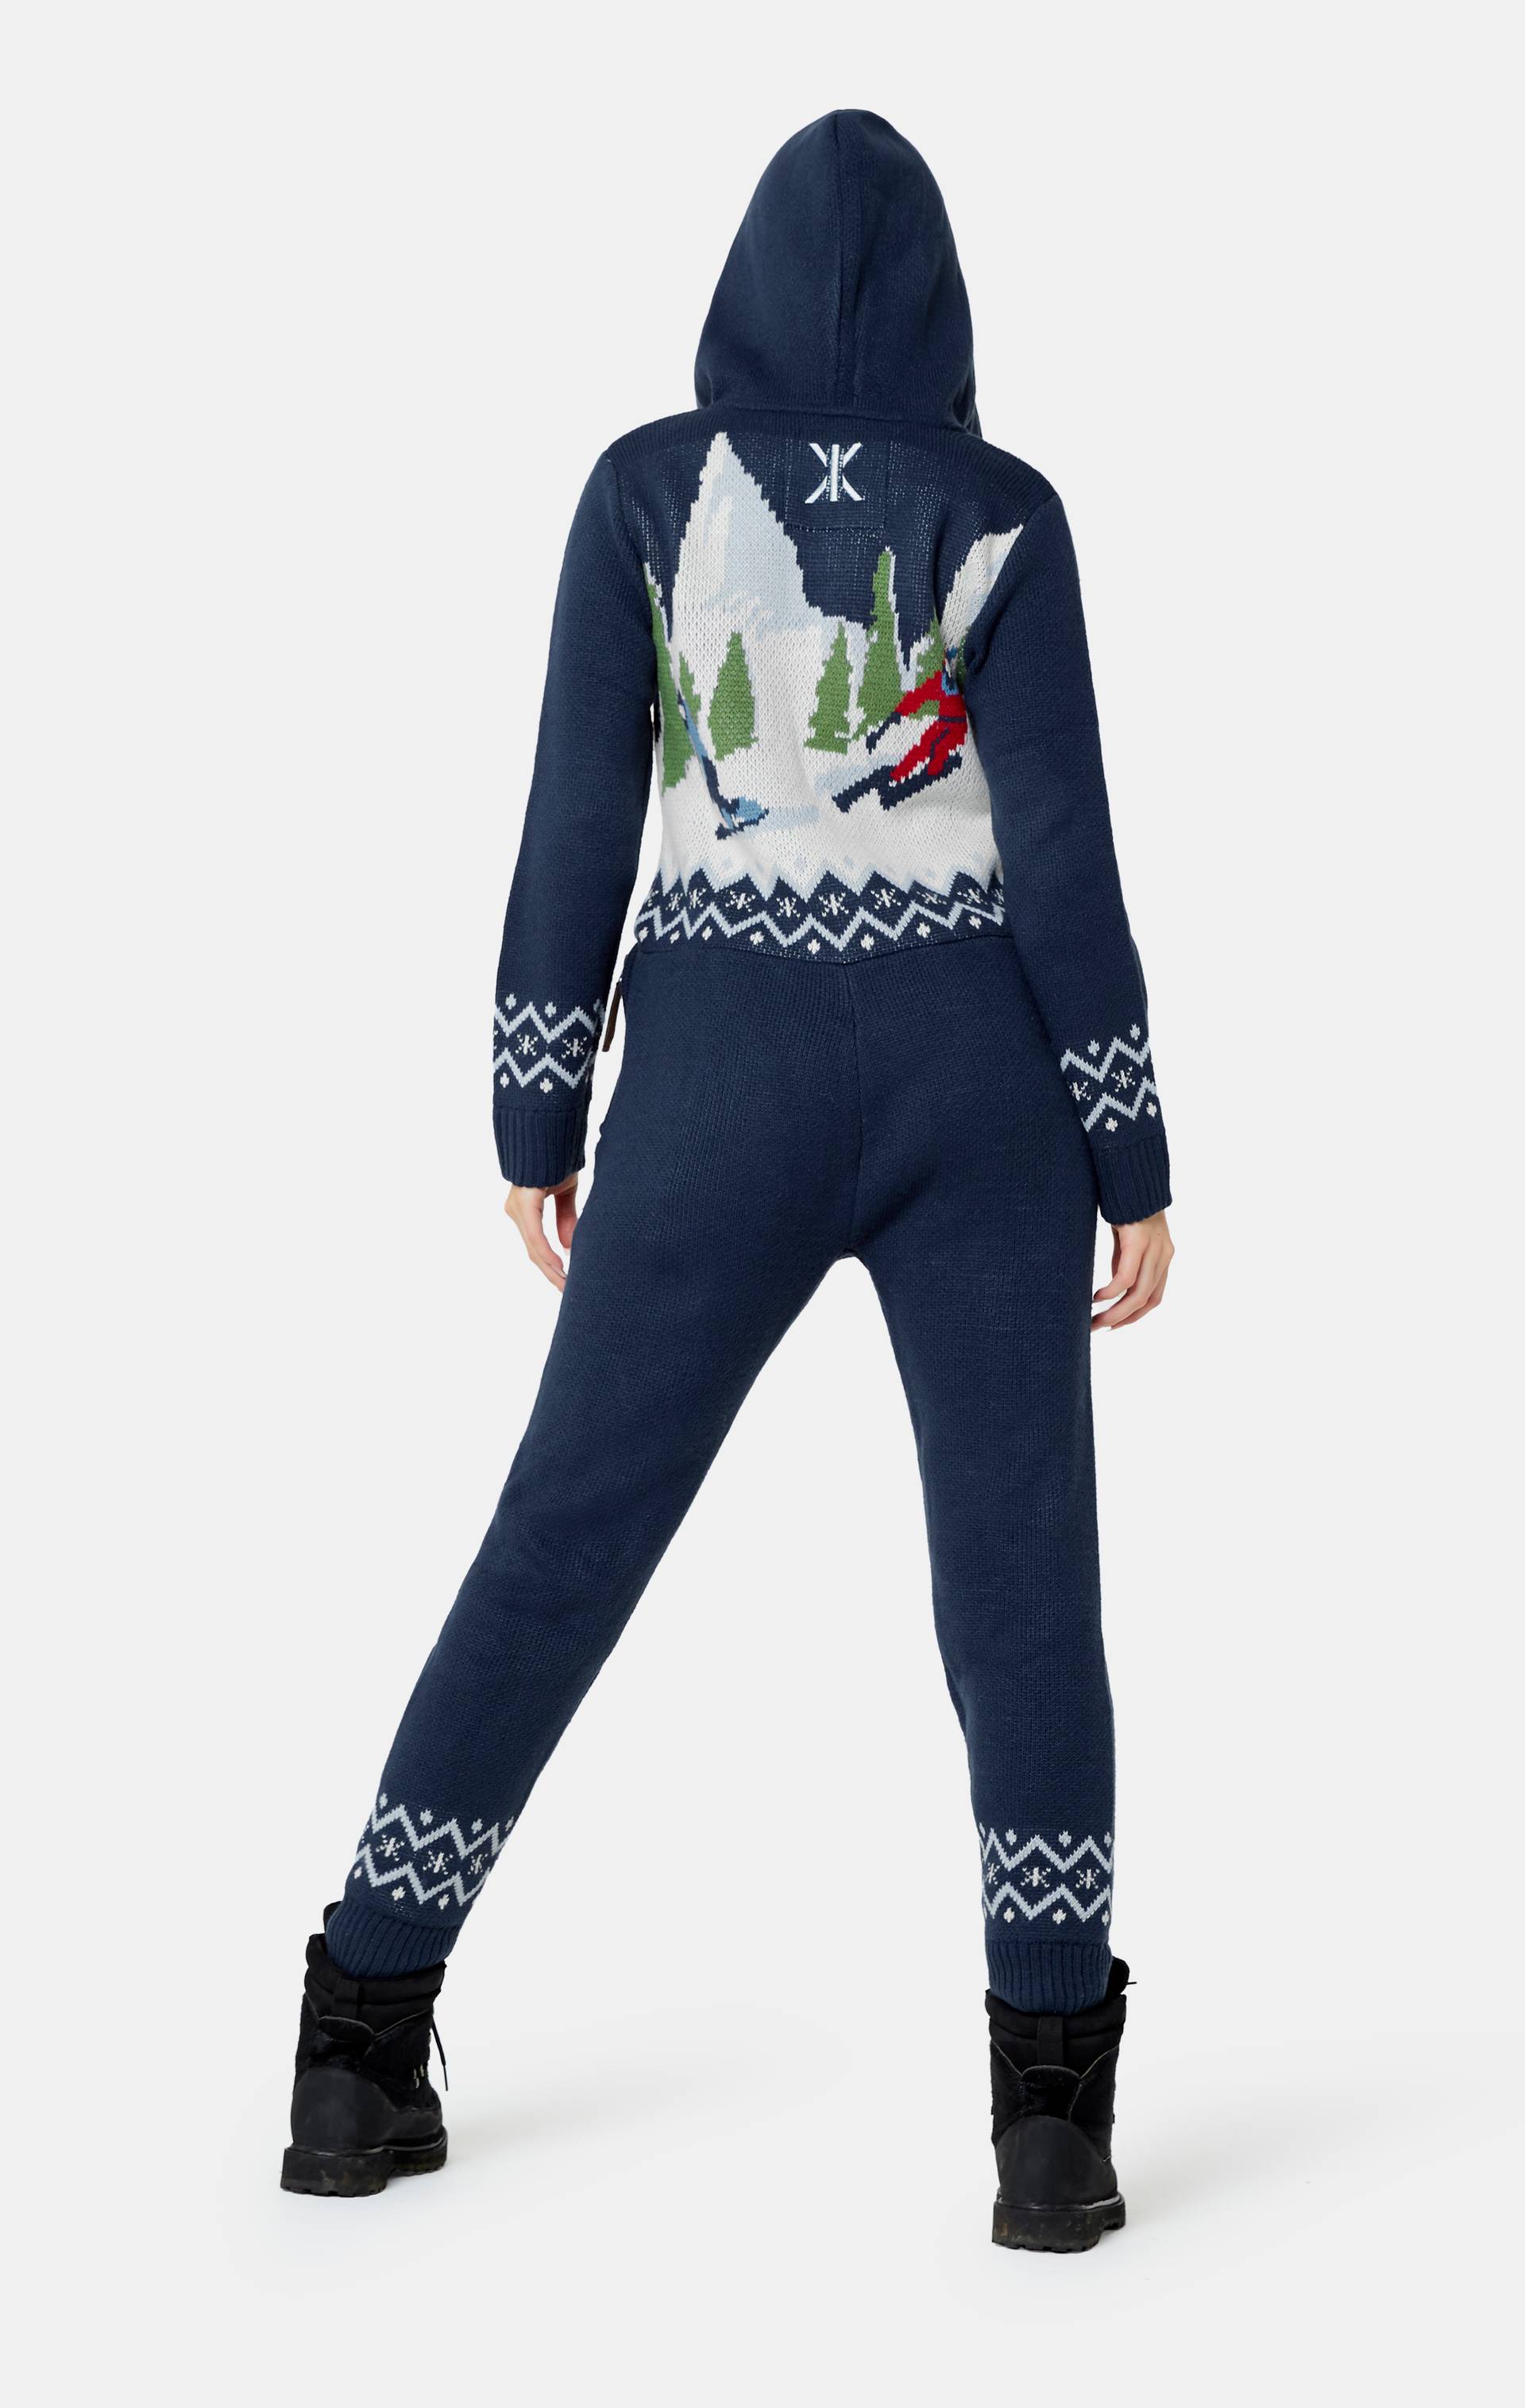 Onepiece Slopestyle Jumpsuit Navy - 10